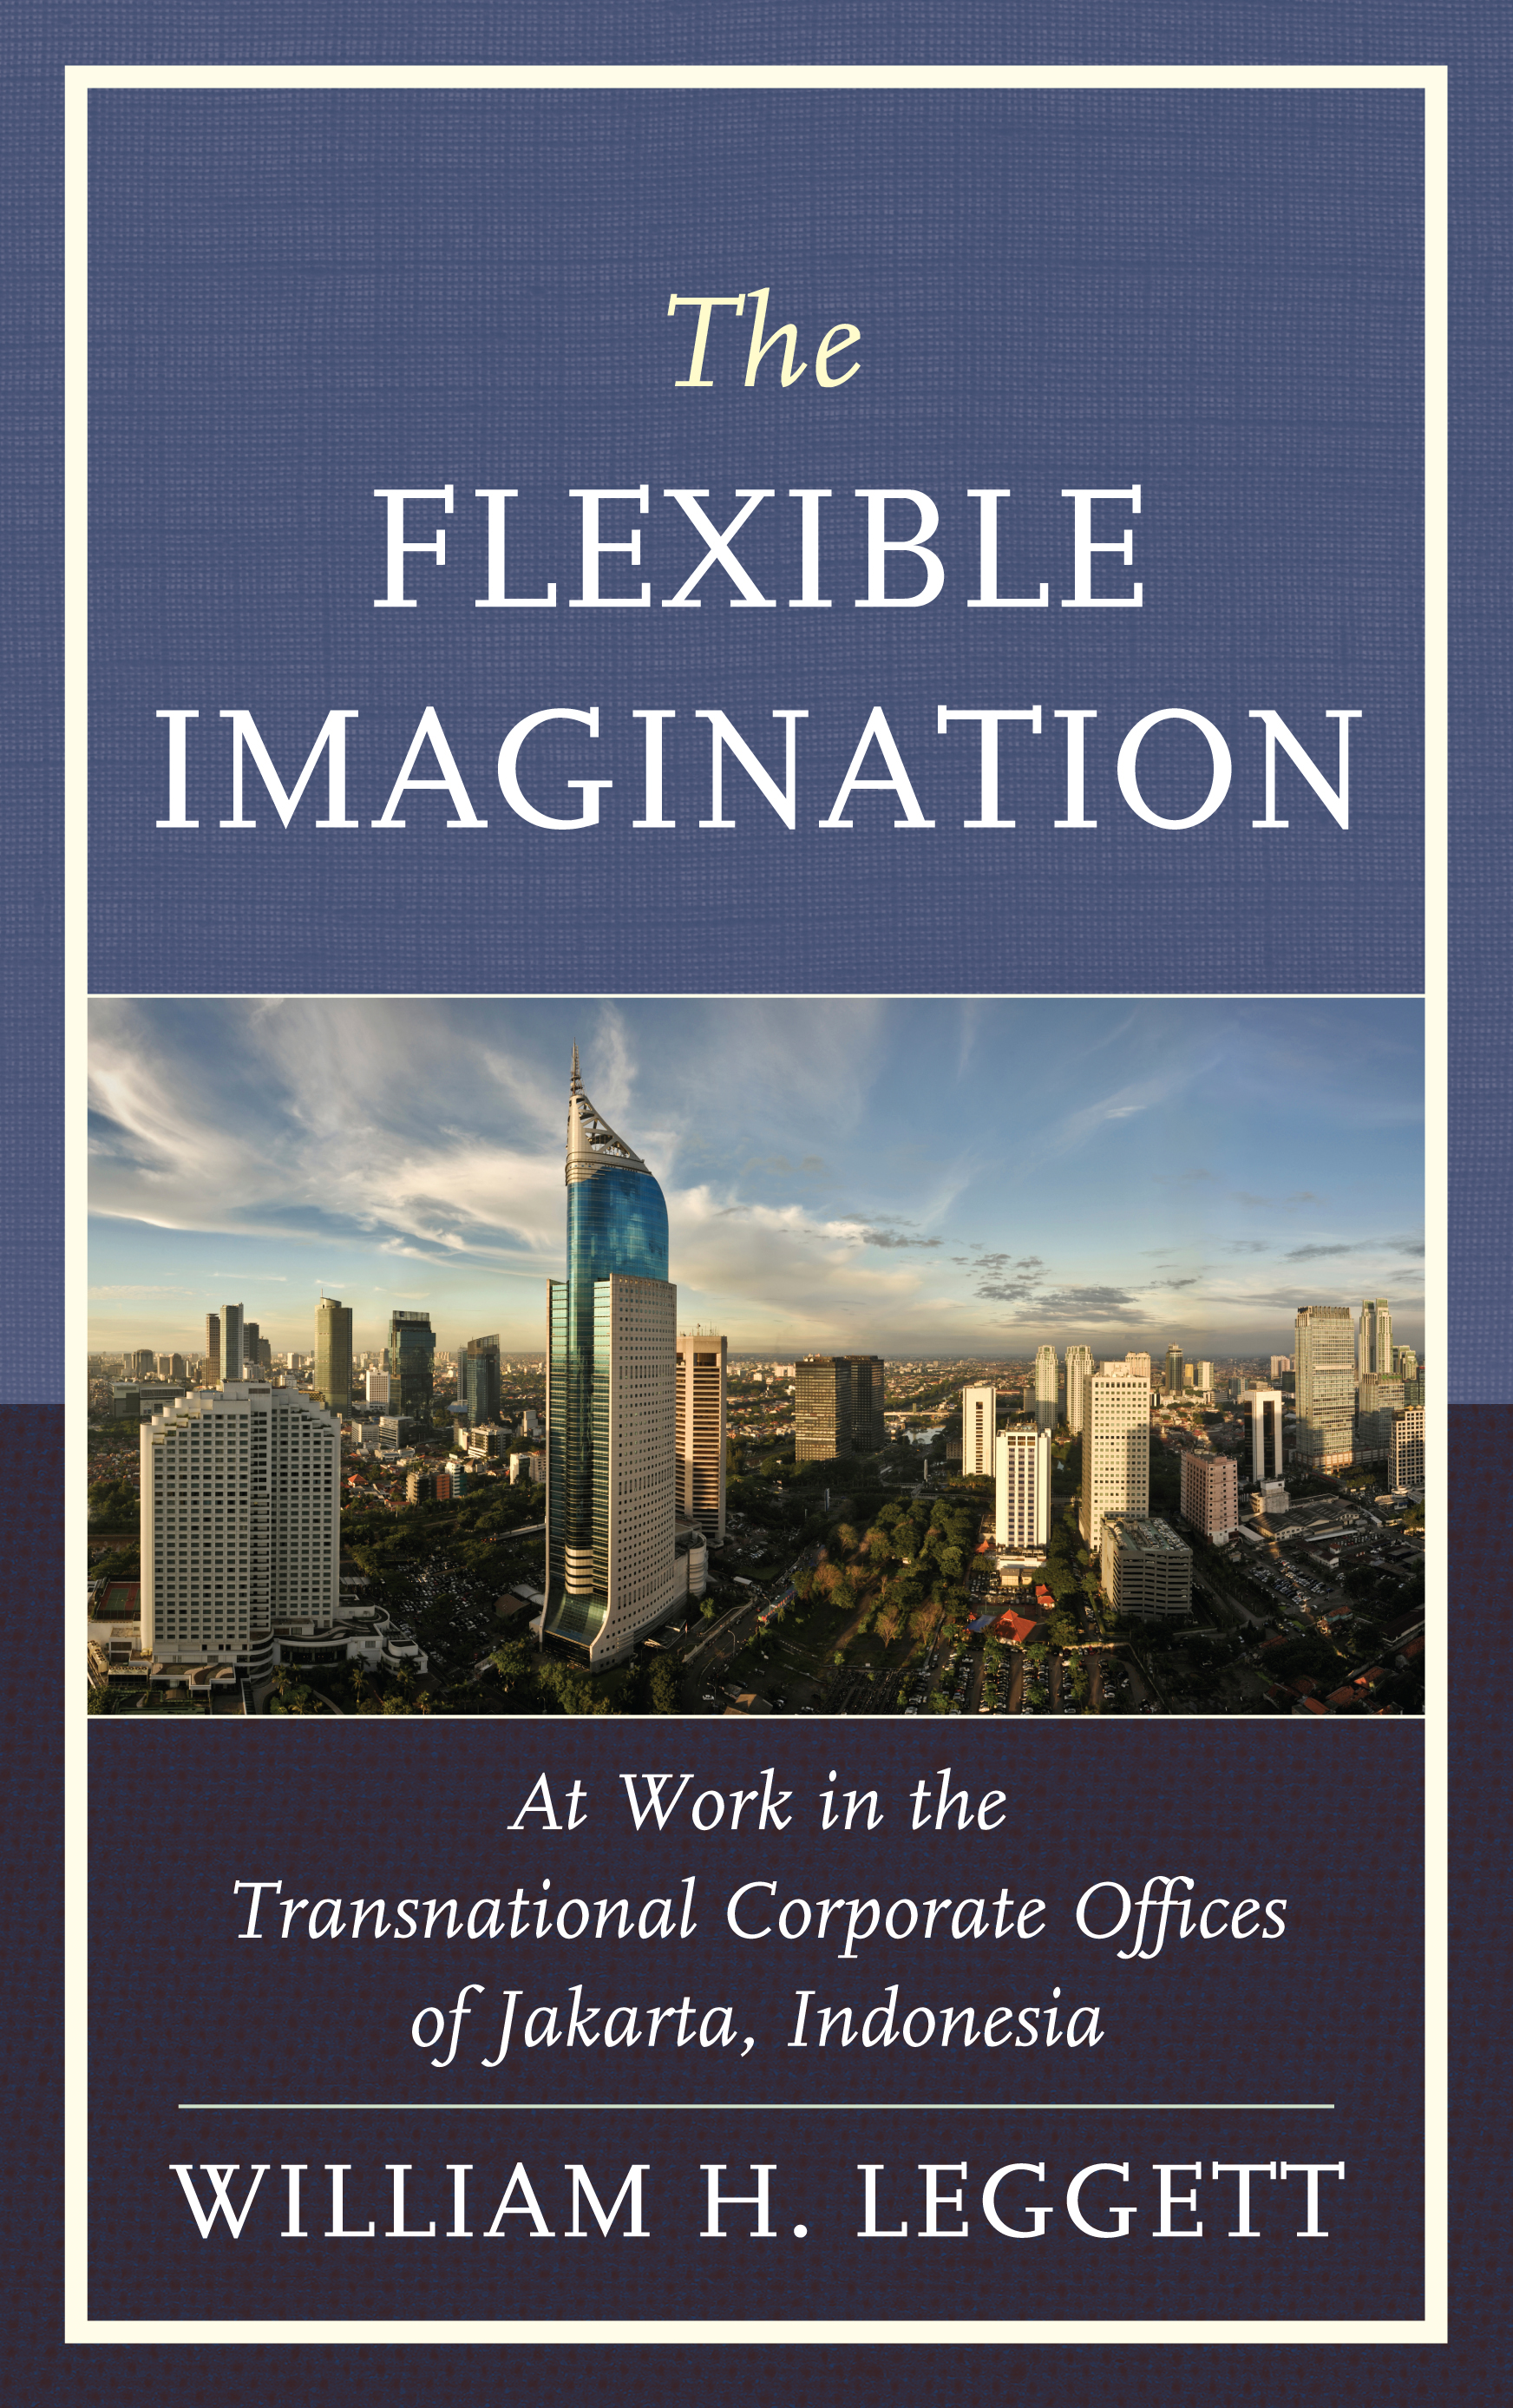 The Flexible Imagination: At Work in the Transnational Corporate Offices of Jakarta, Indonesia